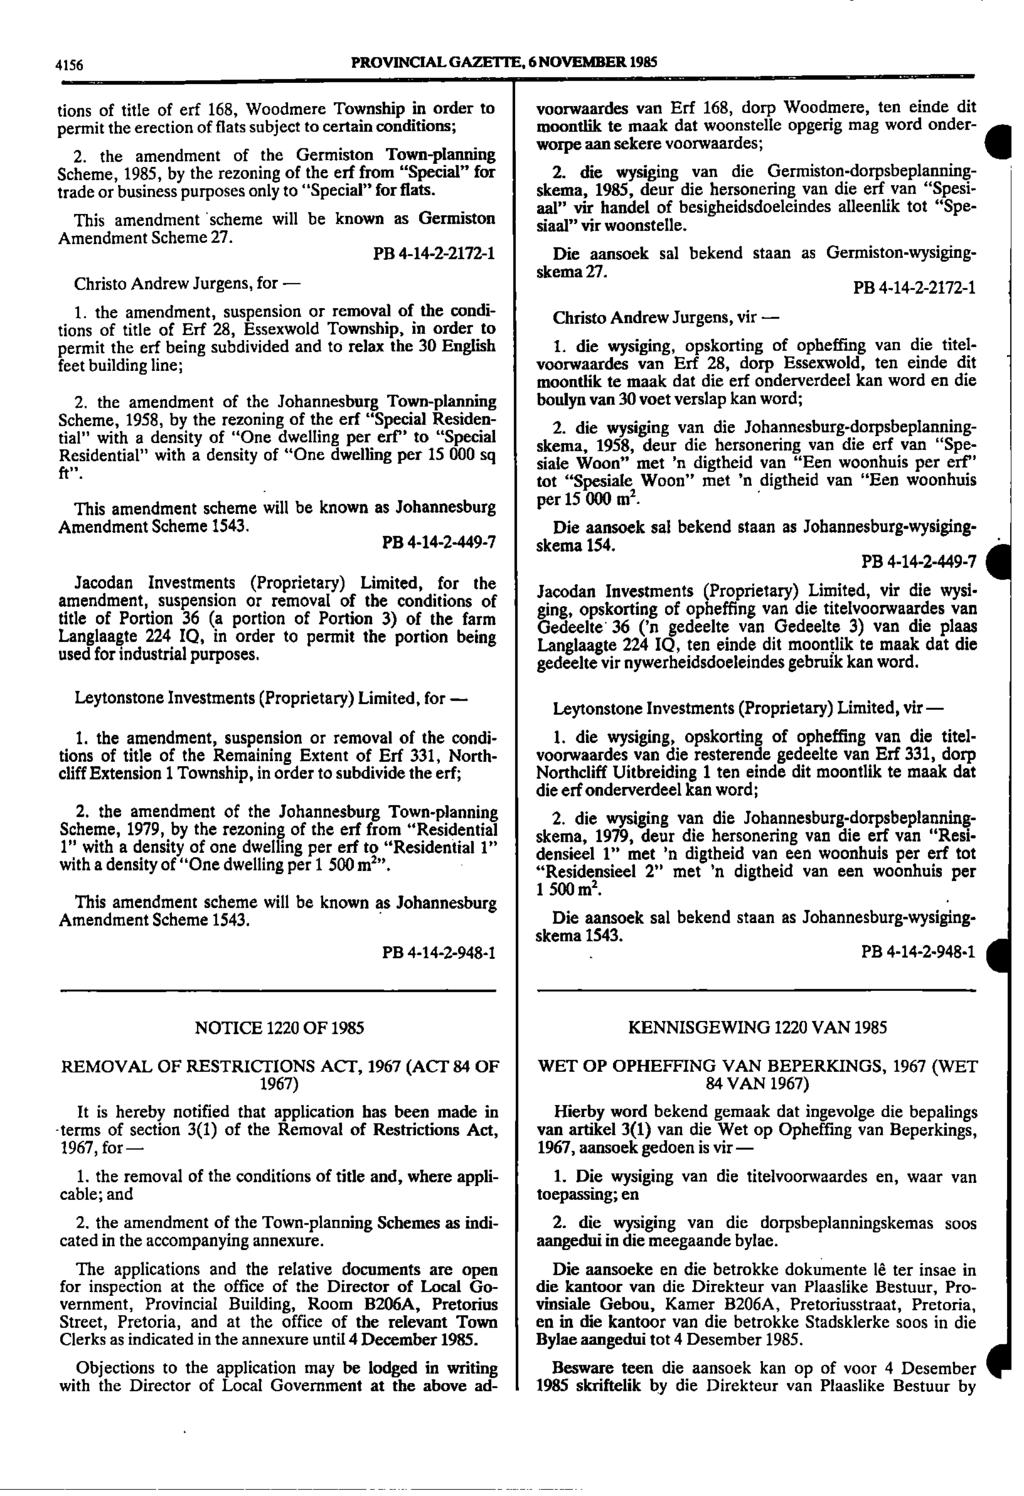 4156 PROVINCIAL GAZETTE, 6 NOVEMBER 1985 tions of title of erf 168, Woodmere Township in order to permit the erection of flats subject to certain conditions; 2.